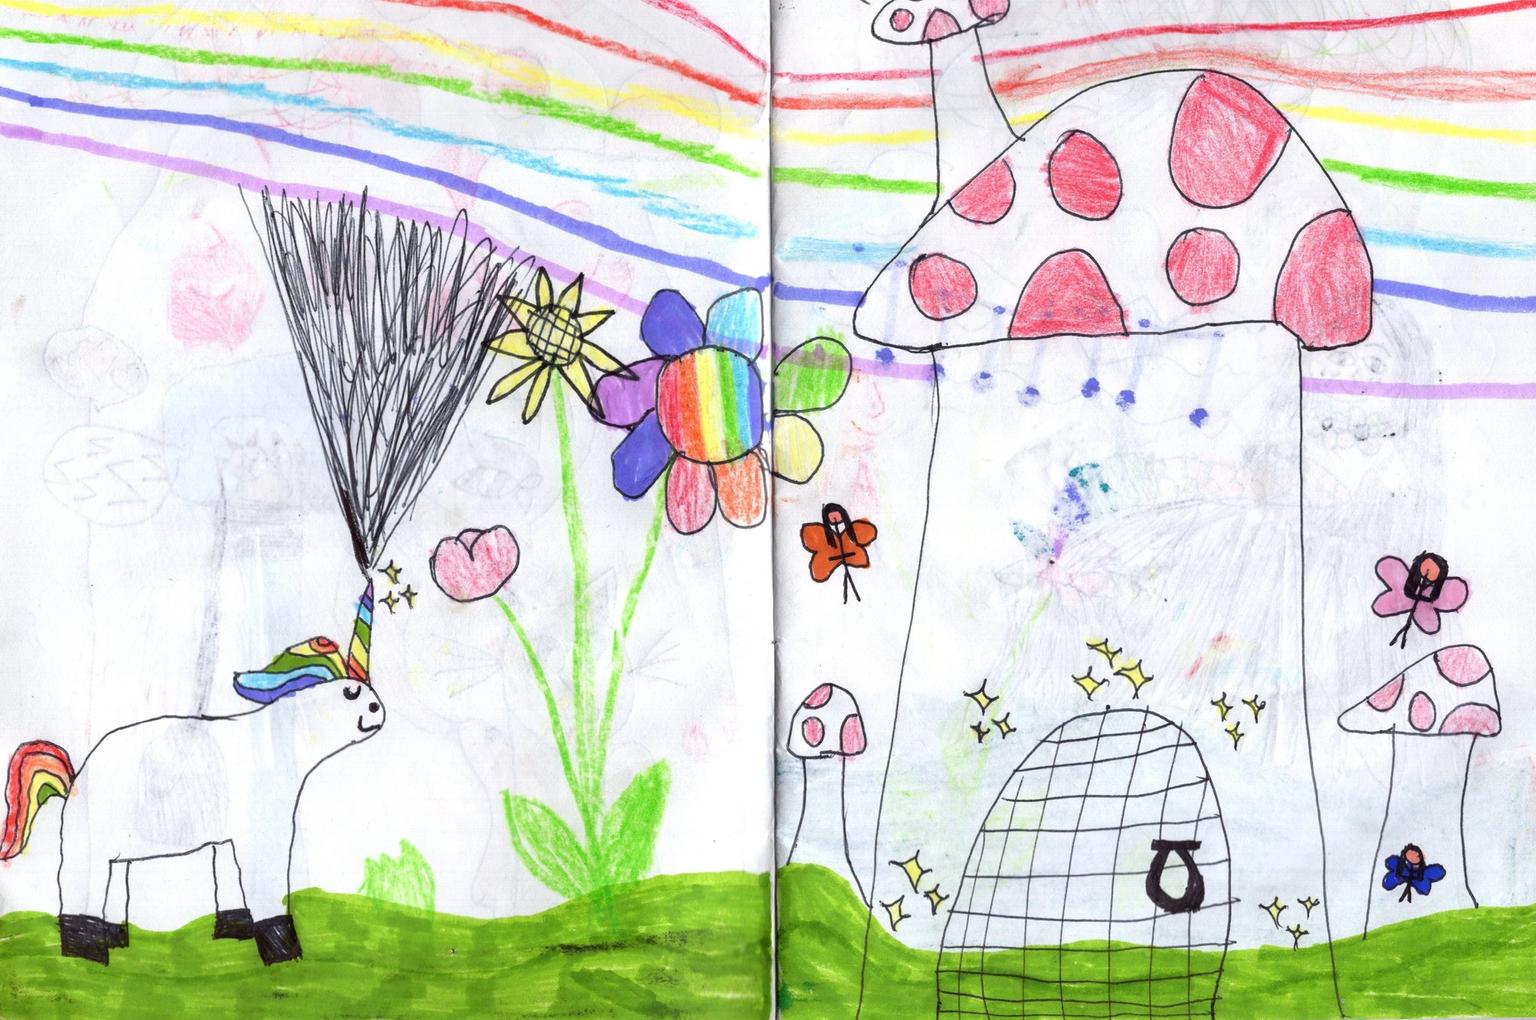 child's drawing of a unicorn with rainbow mane next to rainbow flowers and a mushroom fairy house, with a rainbow in the background